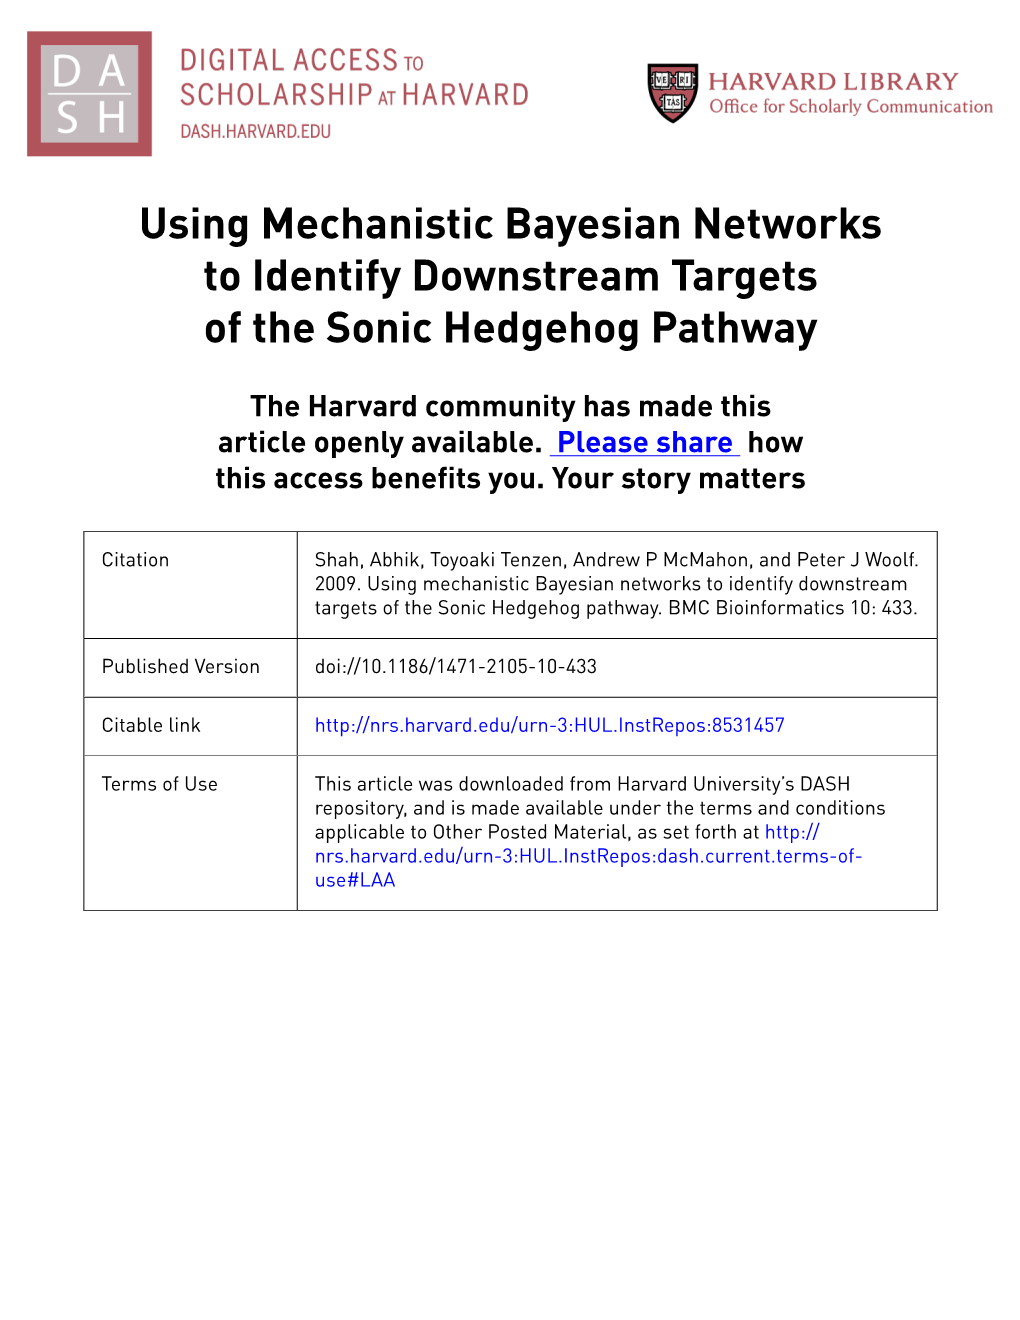 Using Mechanistic Bayesian Networks to Identify Downstream Targets of the Sonic Hedgehog Pathway